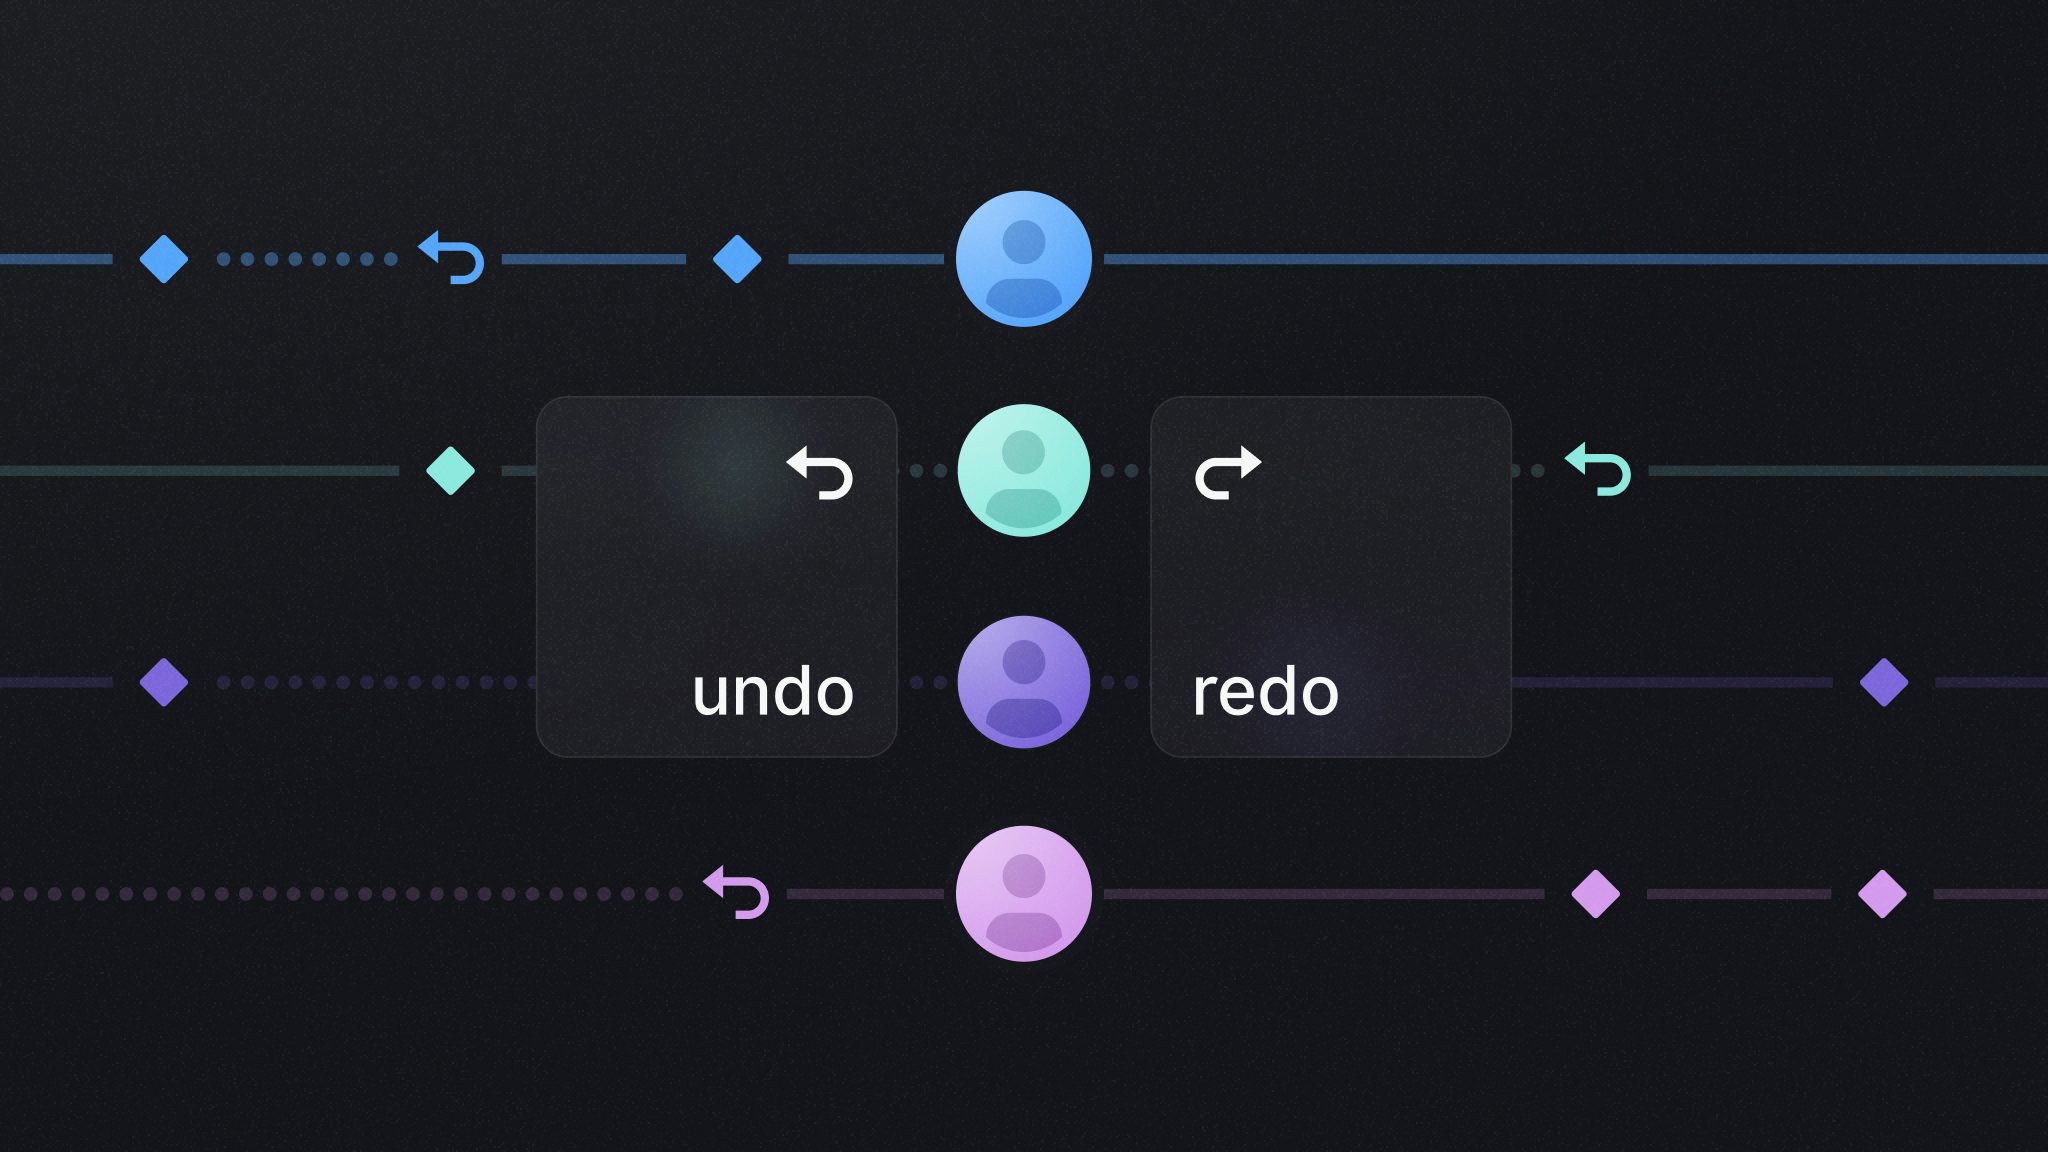 How to build undo/redo in a multiplayer environment